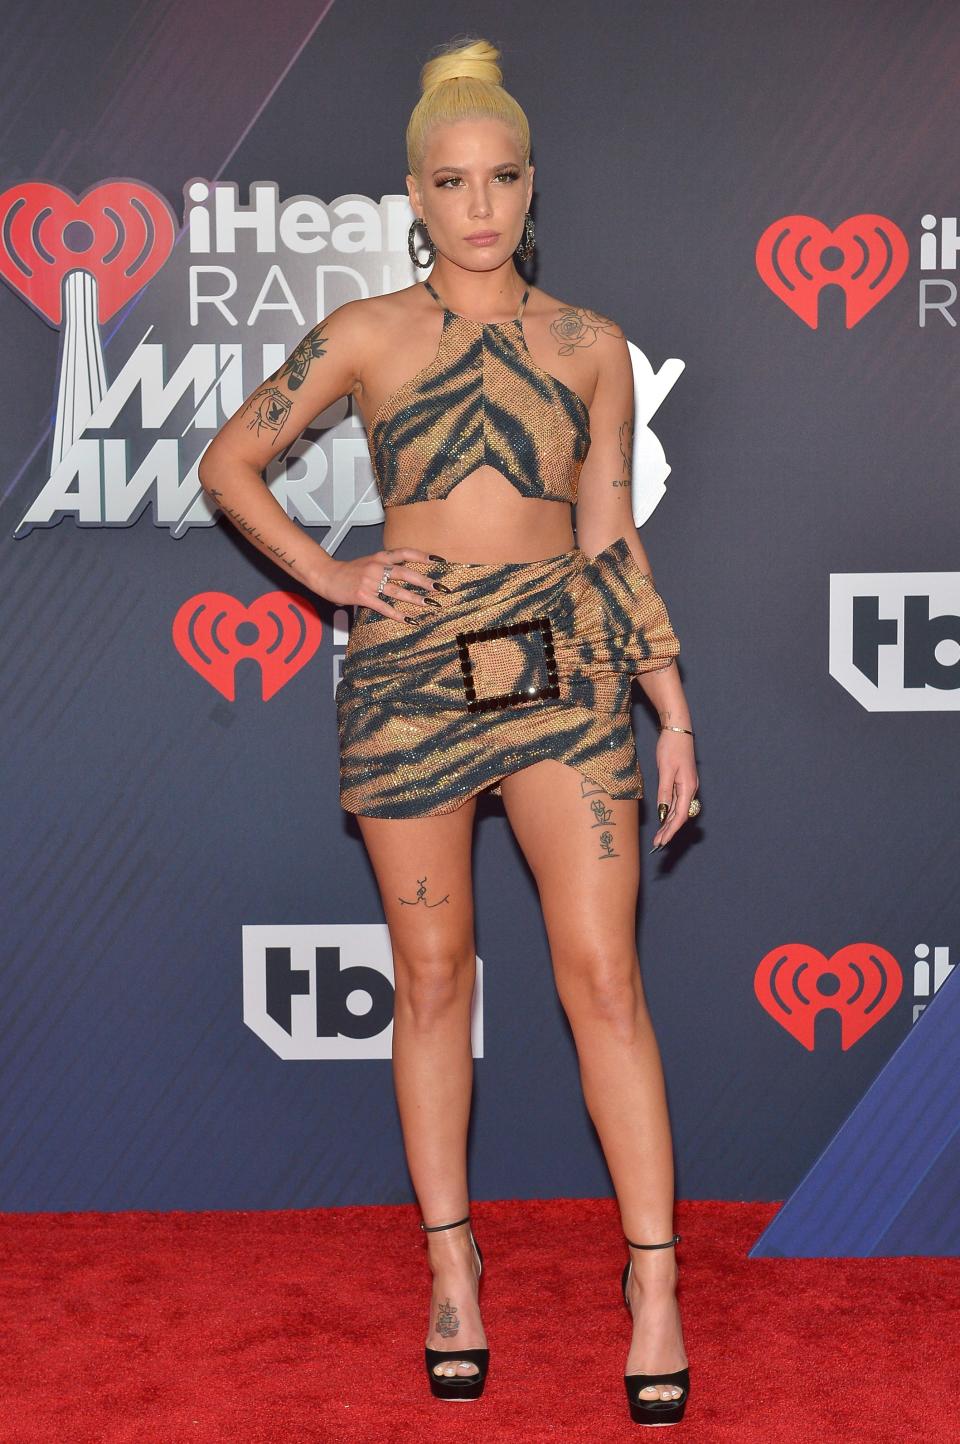 INGLEWOOD, CA - MARCH 11:  Halsey arrives at the 2018 iHeartRadio Music Awards which broadcasted live on TBS, TNT, and truTV at The Forum on March 11, 2018 in Inglewood, California.  (Photo by Rachel Murray/Getty Images)